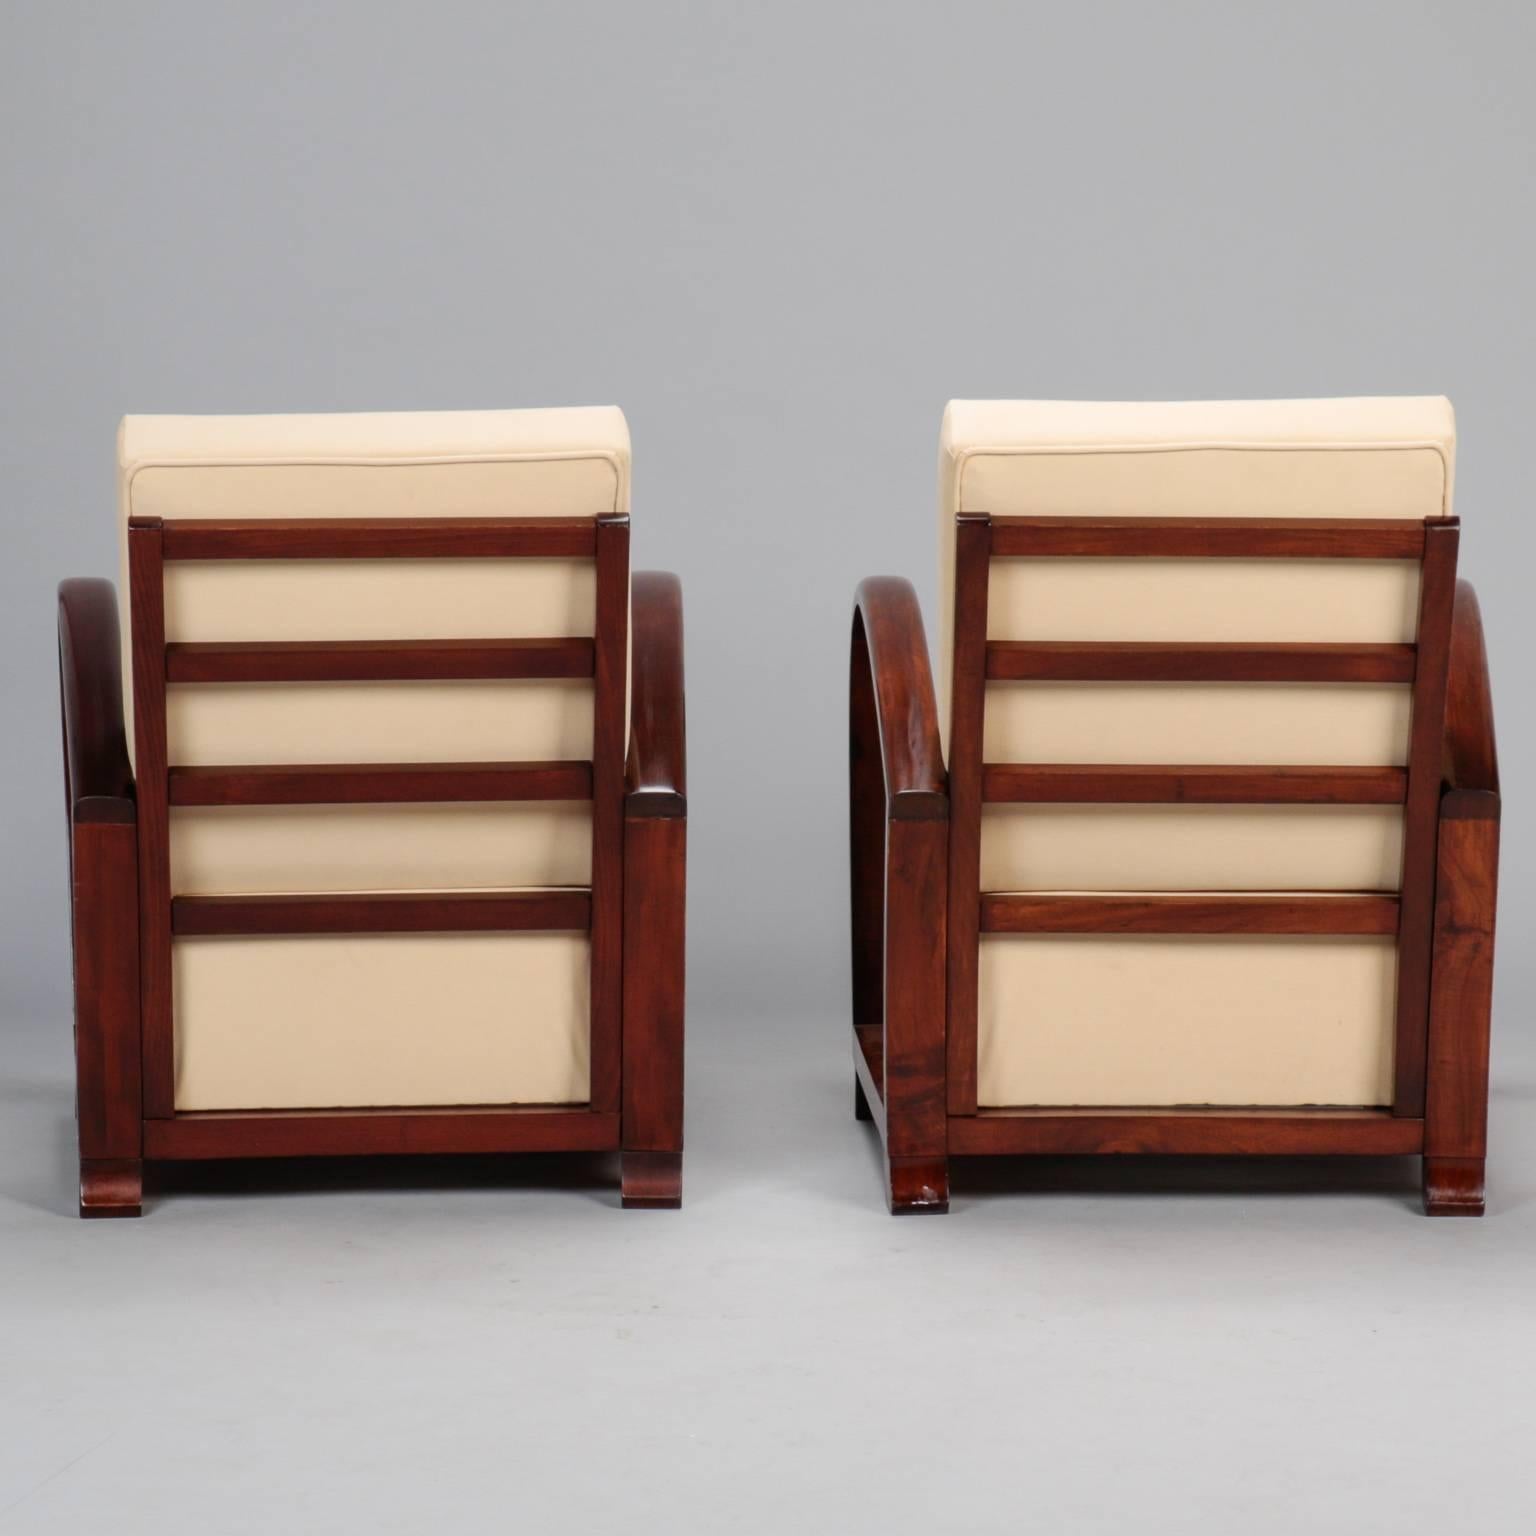 European Pair of Art Deco Chairs with Curved Palisander Arms